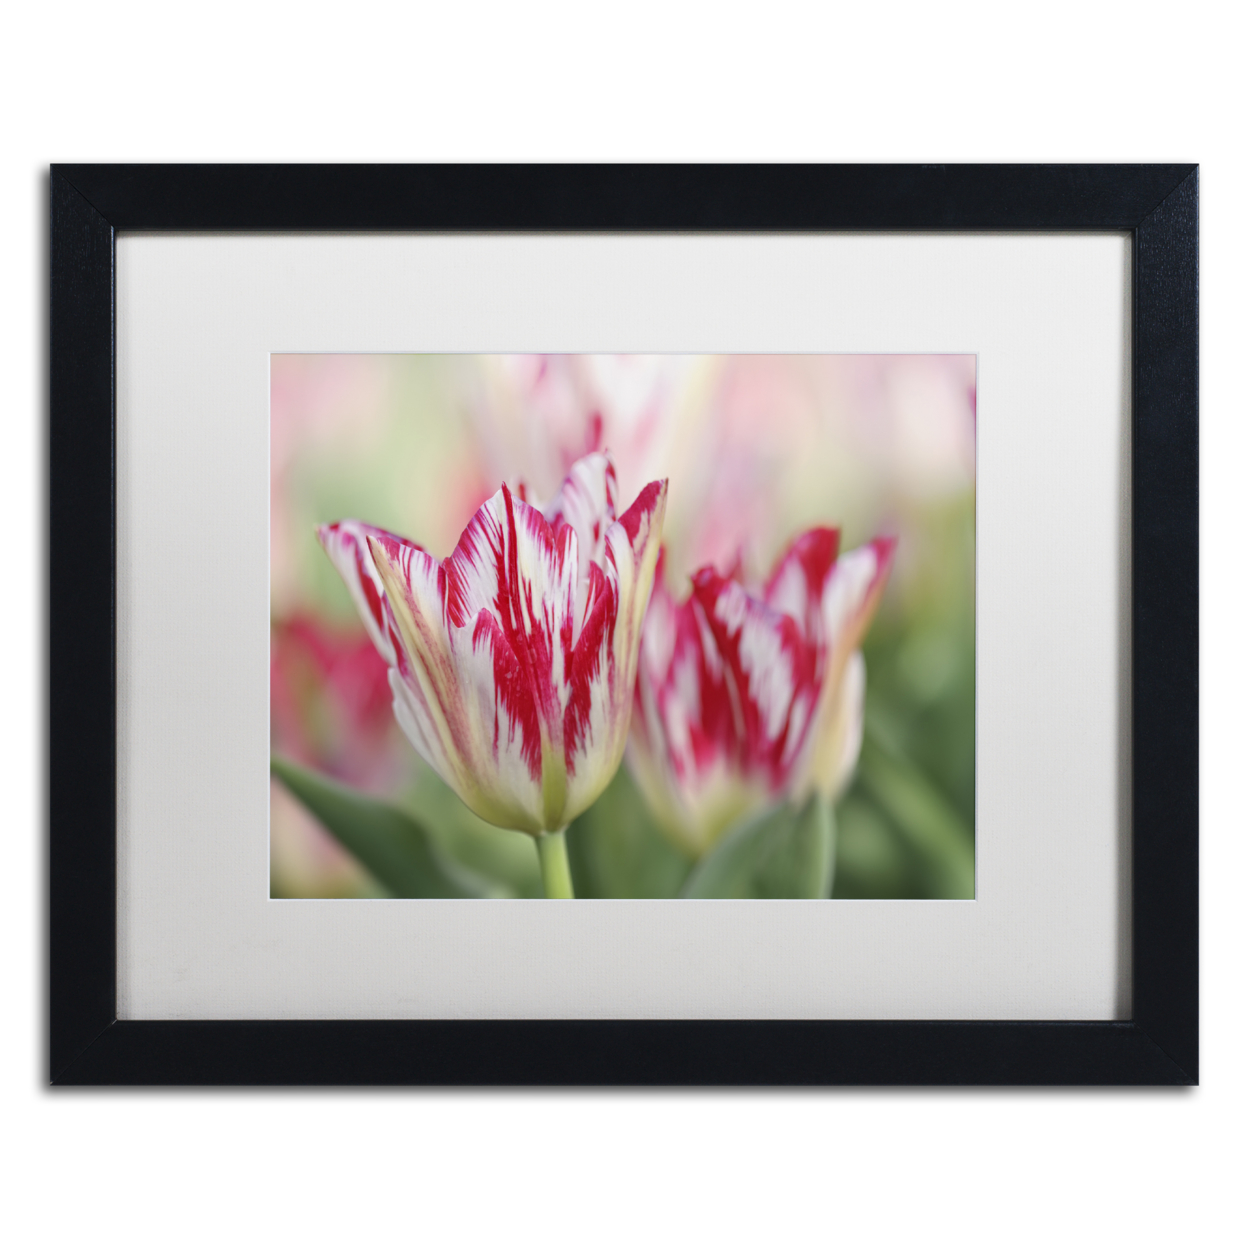 Cora Niele 'Rembrandt Silver Standard Tulip' Black Wooden Framed Art 18 X 22 Inches